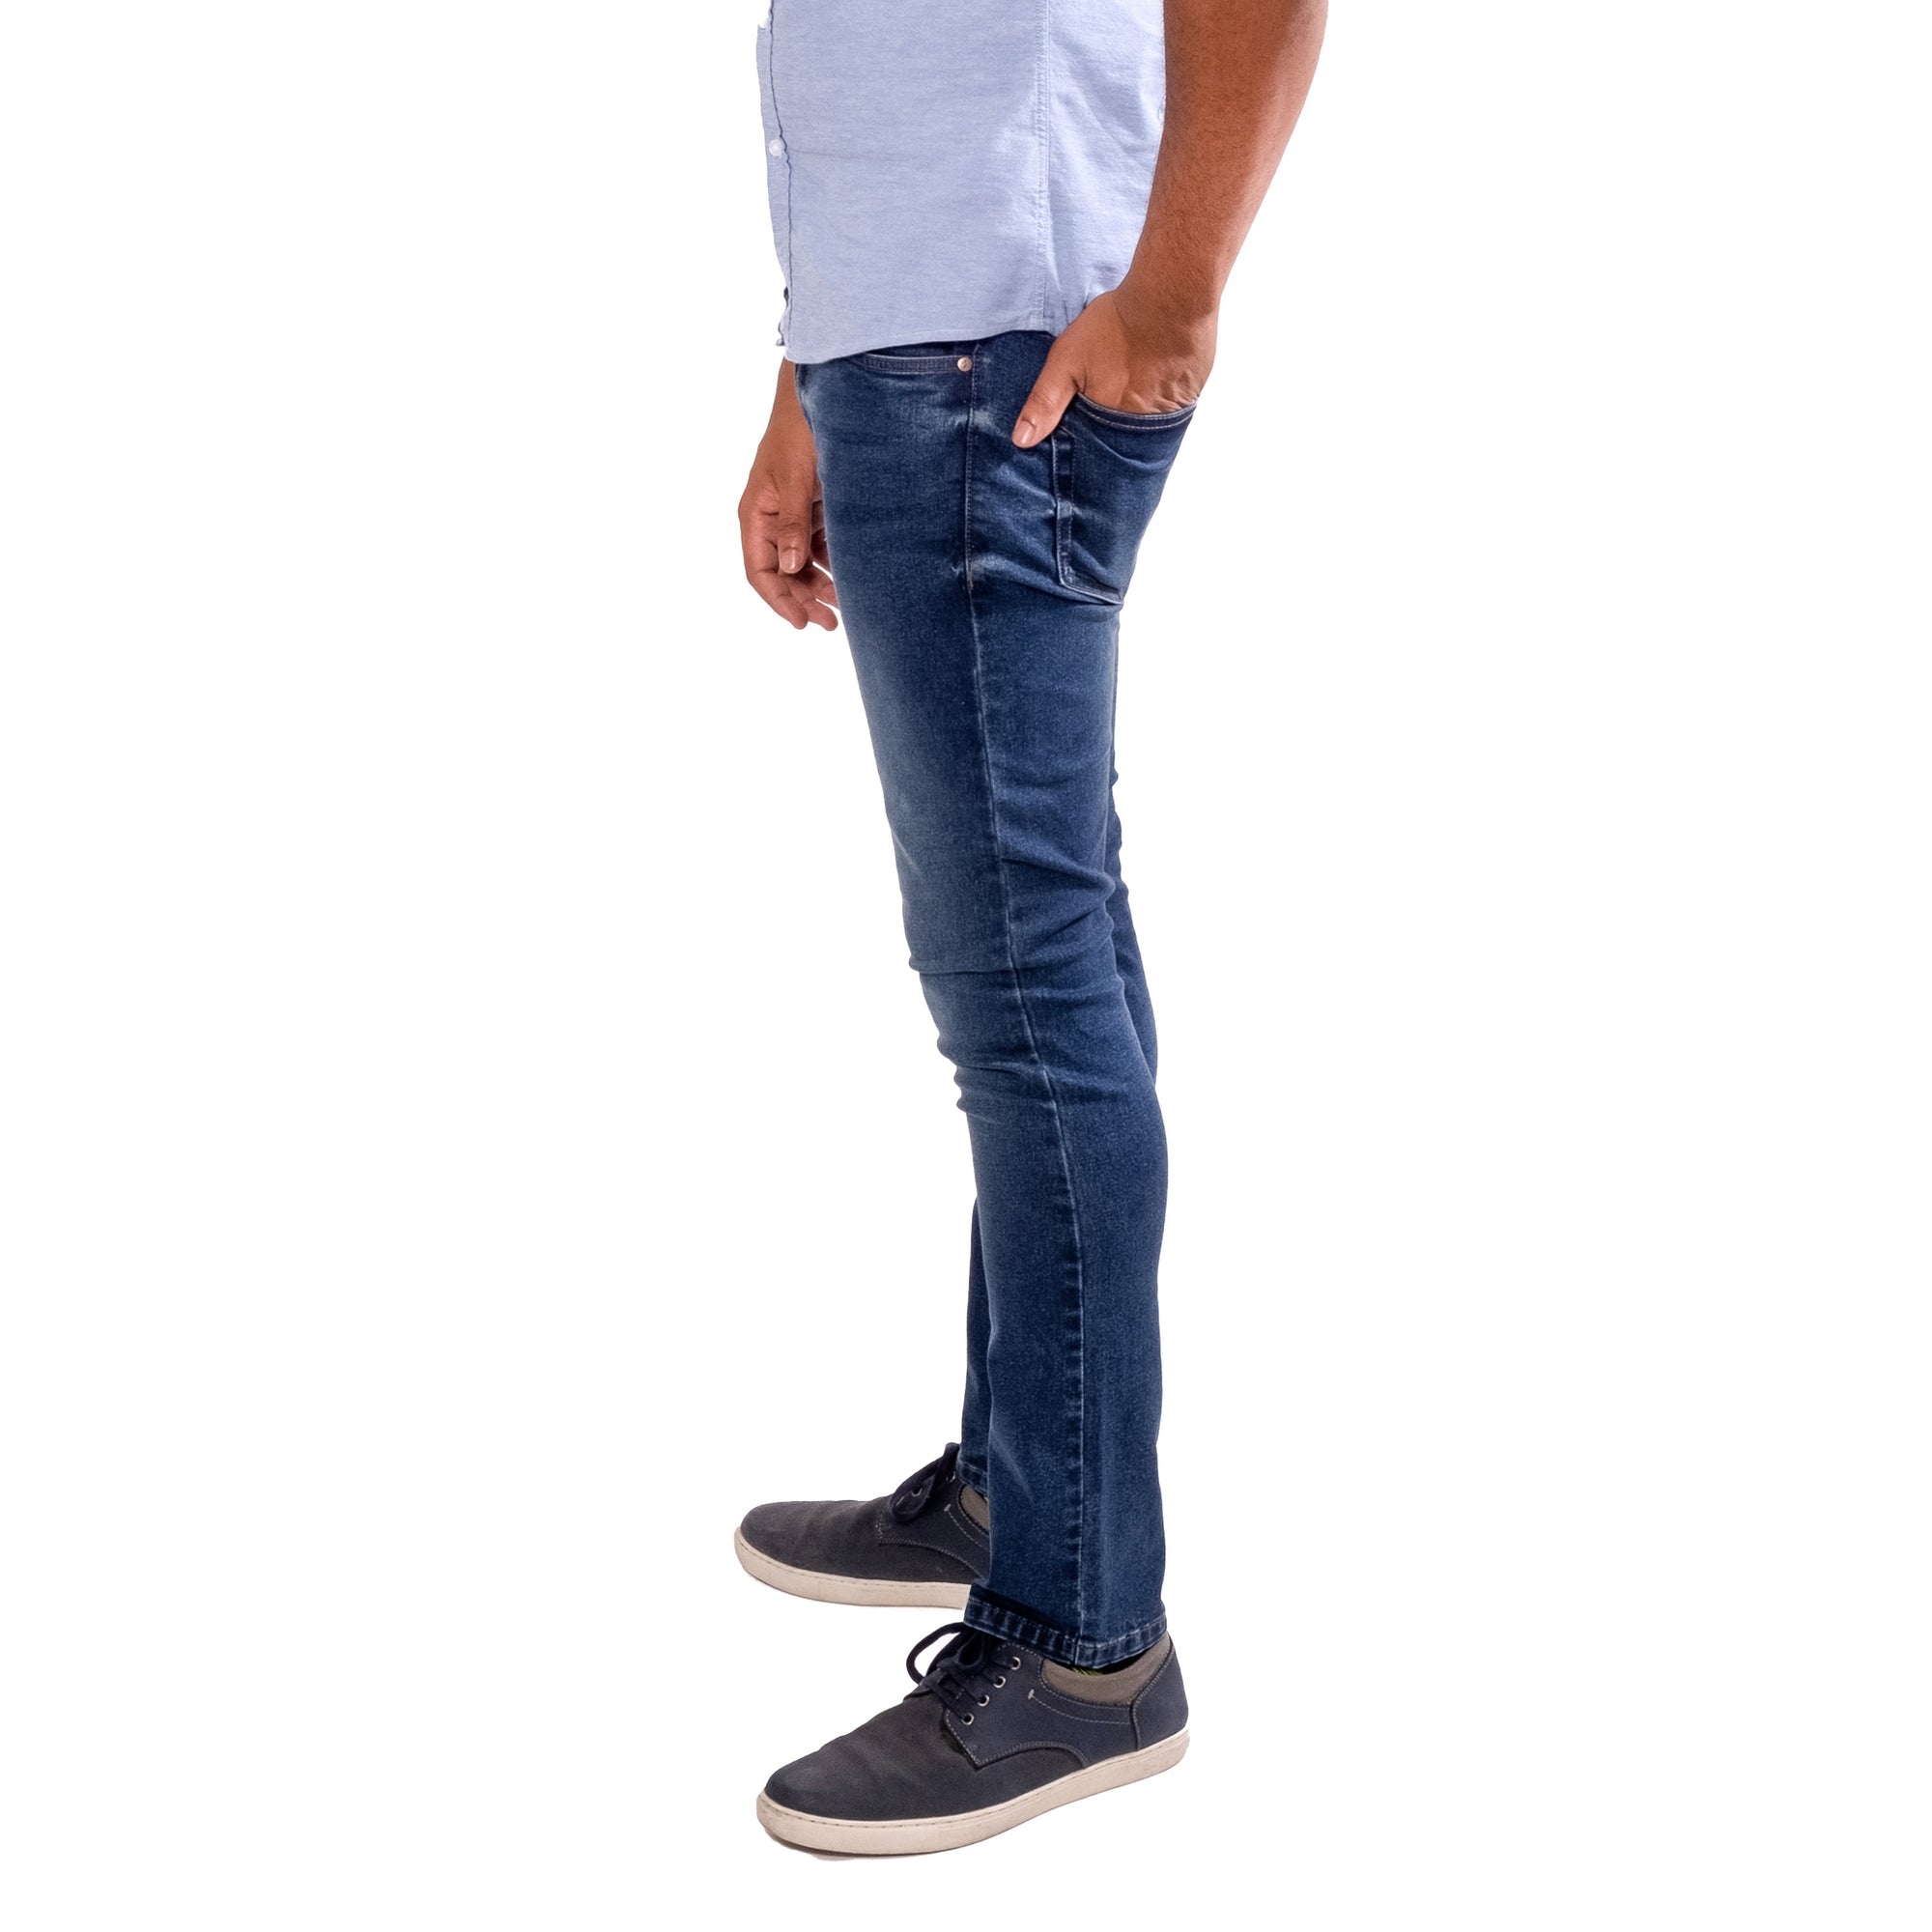 Jeans Fit - | Blue Admiral Skinny Jean Medium Perfect The /